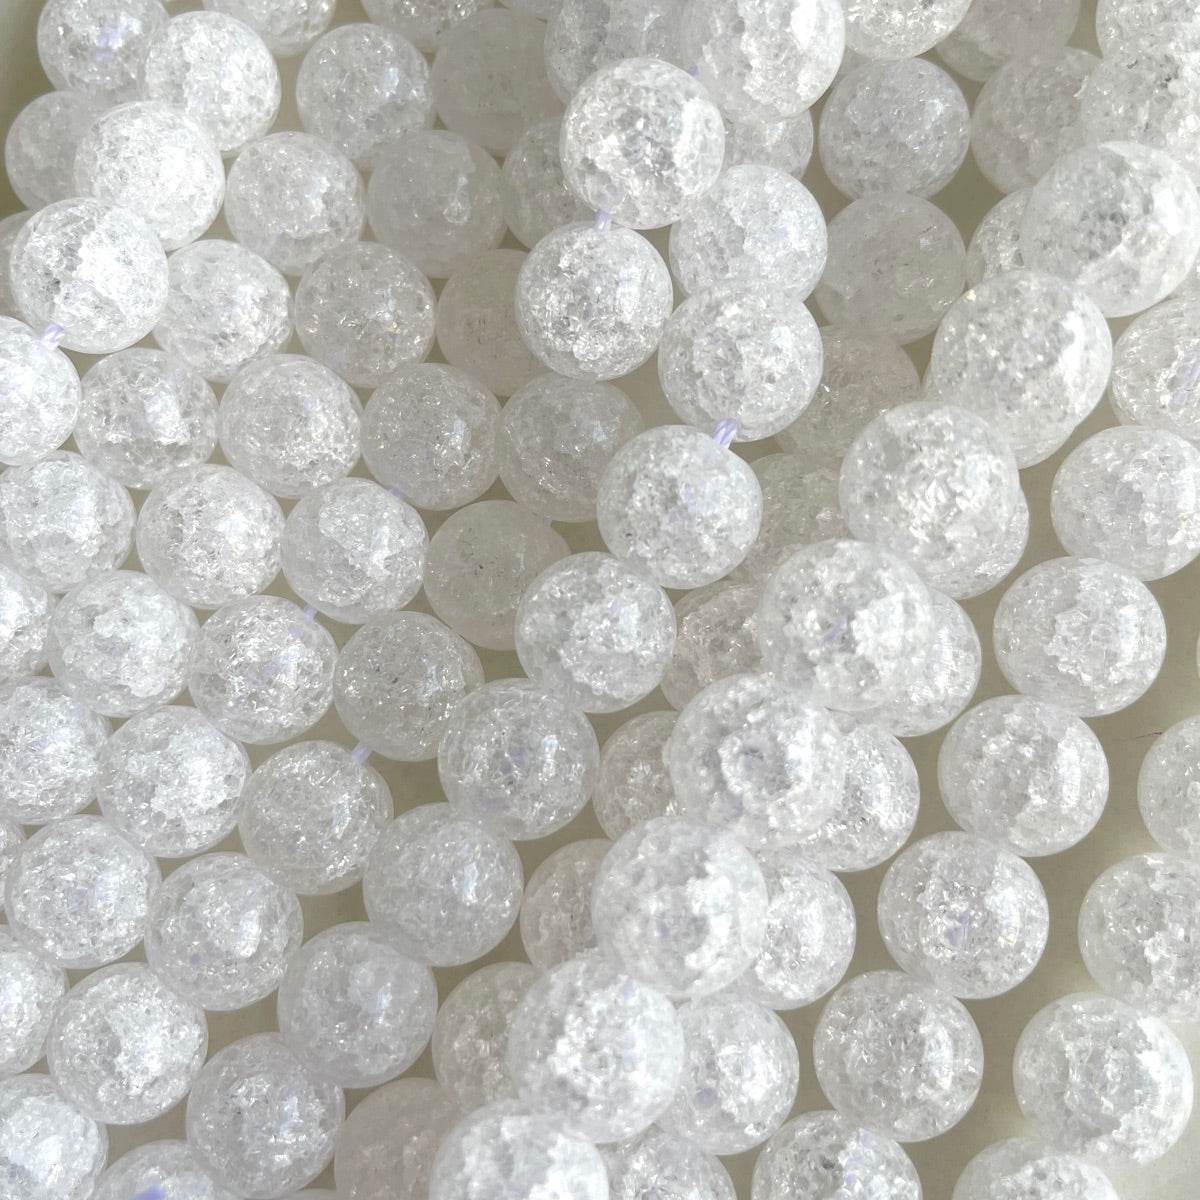 Clear Quartz Smooth Round Beads Full Strand 15.5 inches 6mm, 8mm, 10mm,  12mm,14mm, GRN202 - BeadsCreation4u